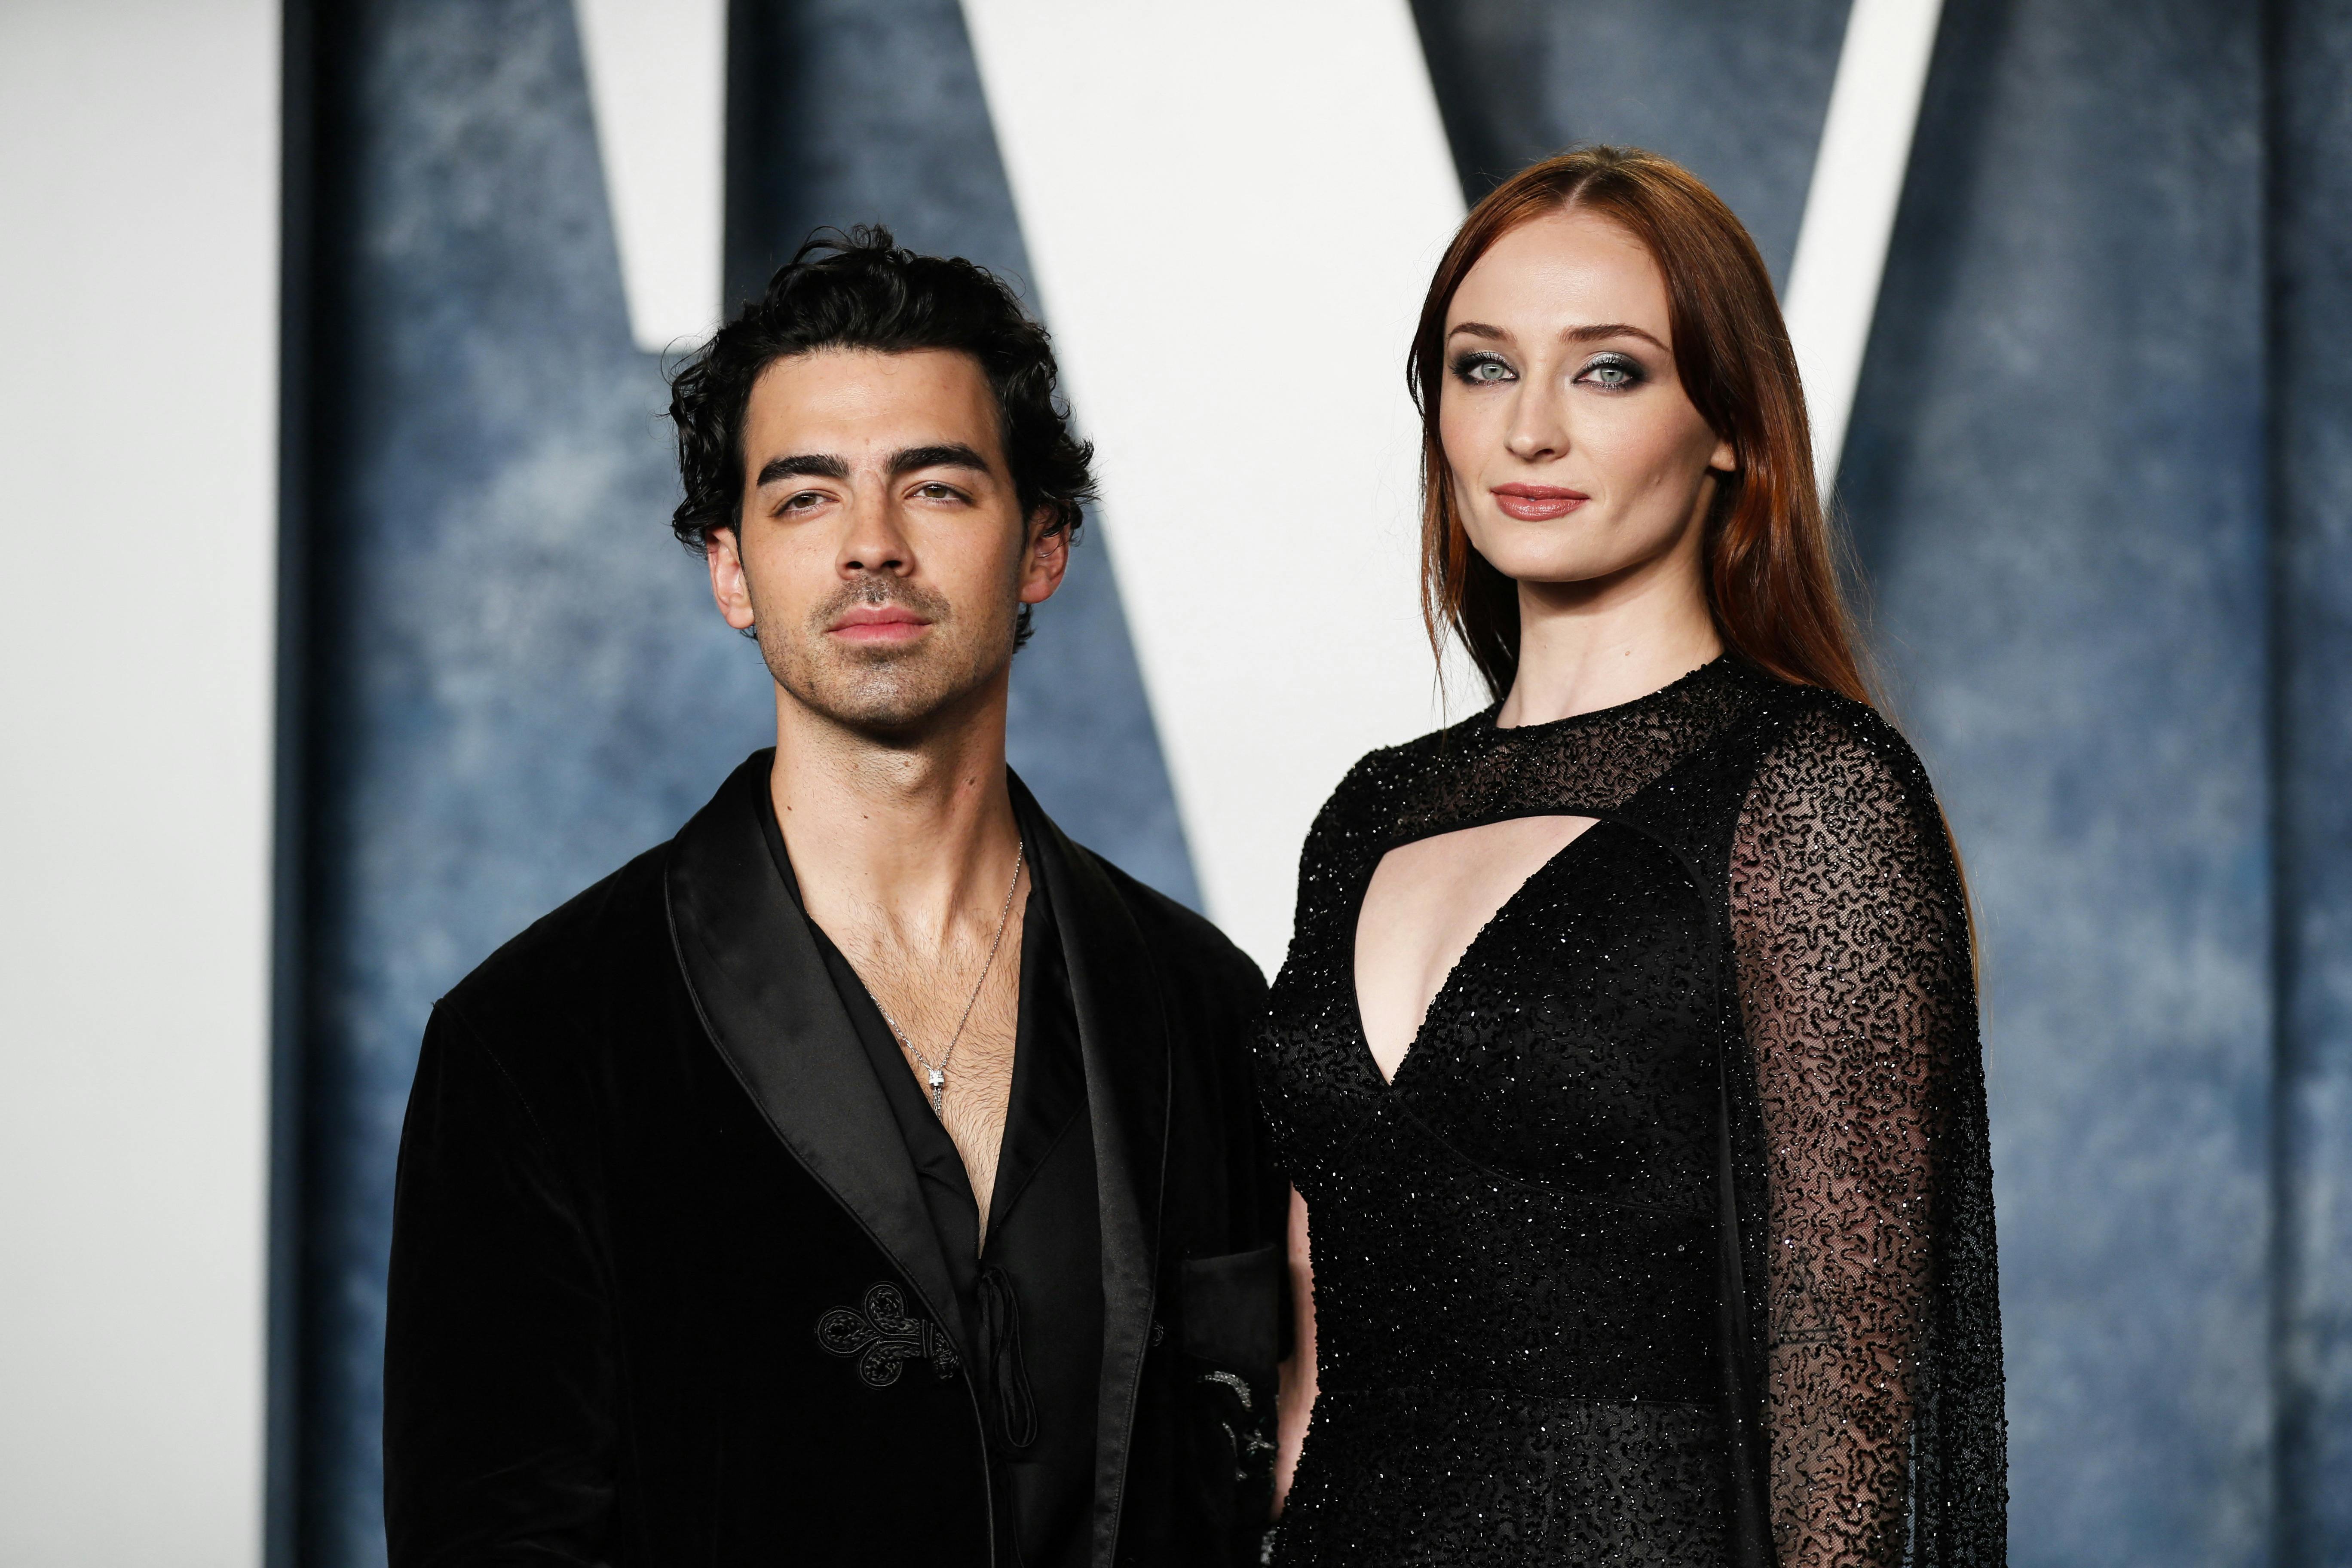 Joe Jonas and Sophie Turner arrives at the Vanity Fair Oscar party after the 95th Academy Awards, known as the Oscars, in Beverly Hills, California, U.S., March 12, 2023. REUTERS/Danny Moloshok